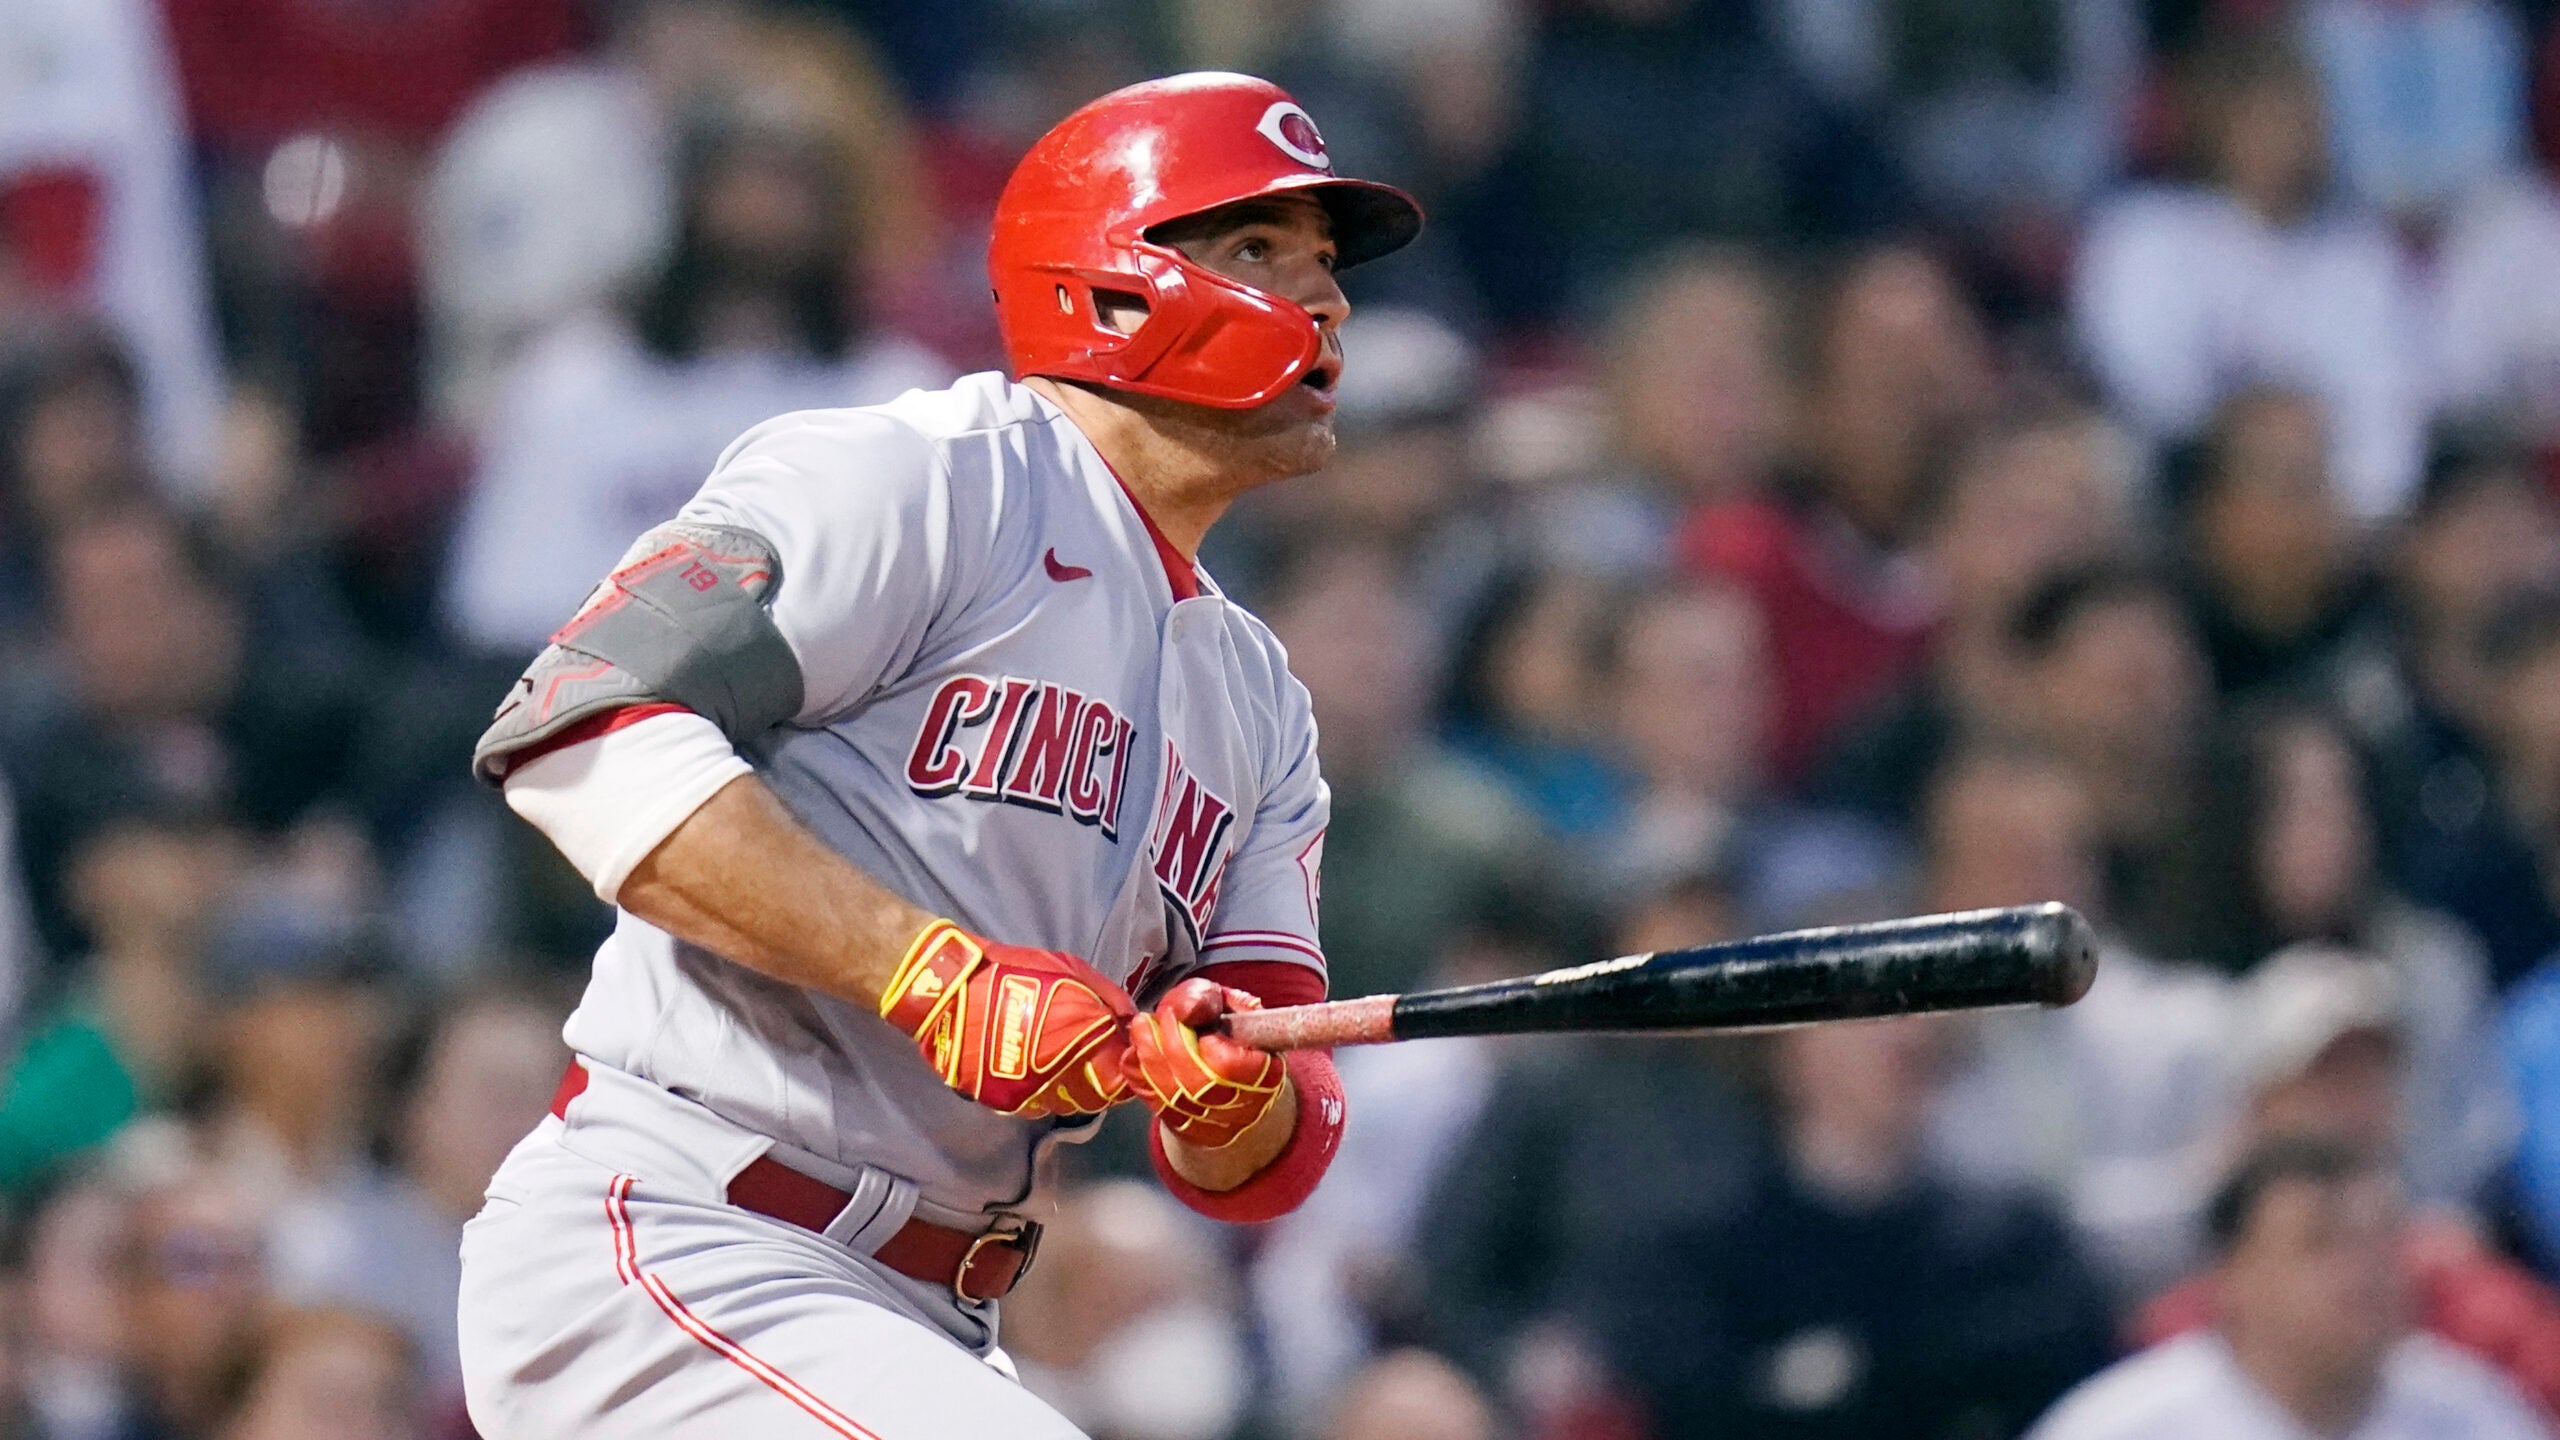 Luis Castillo, Joey Votto lead Reds to 1st Fenway win since 75 Series